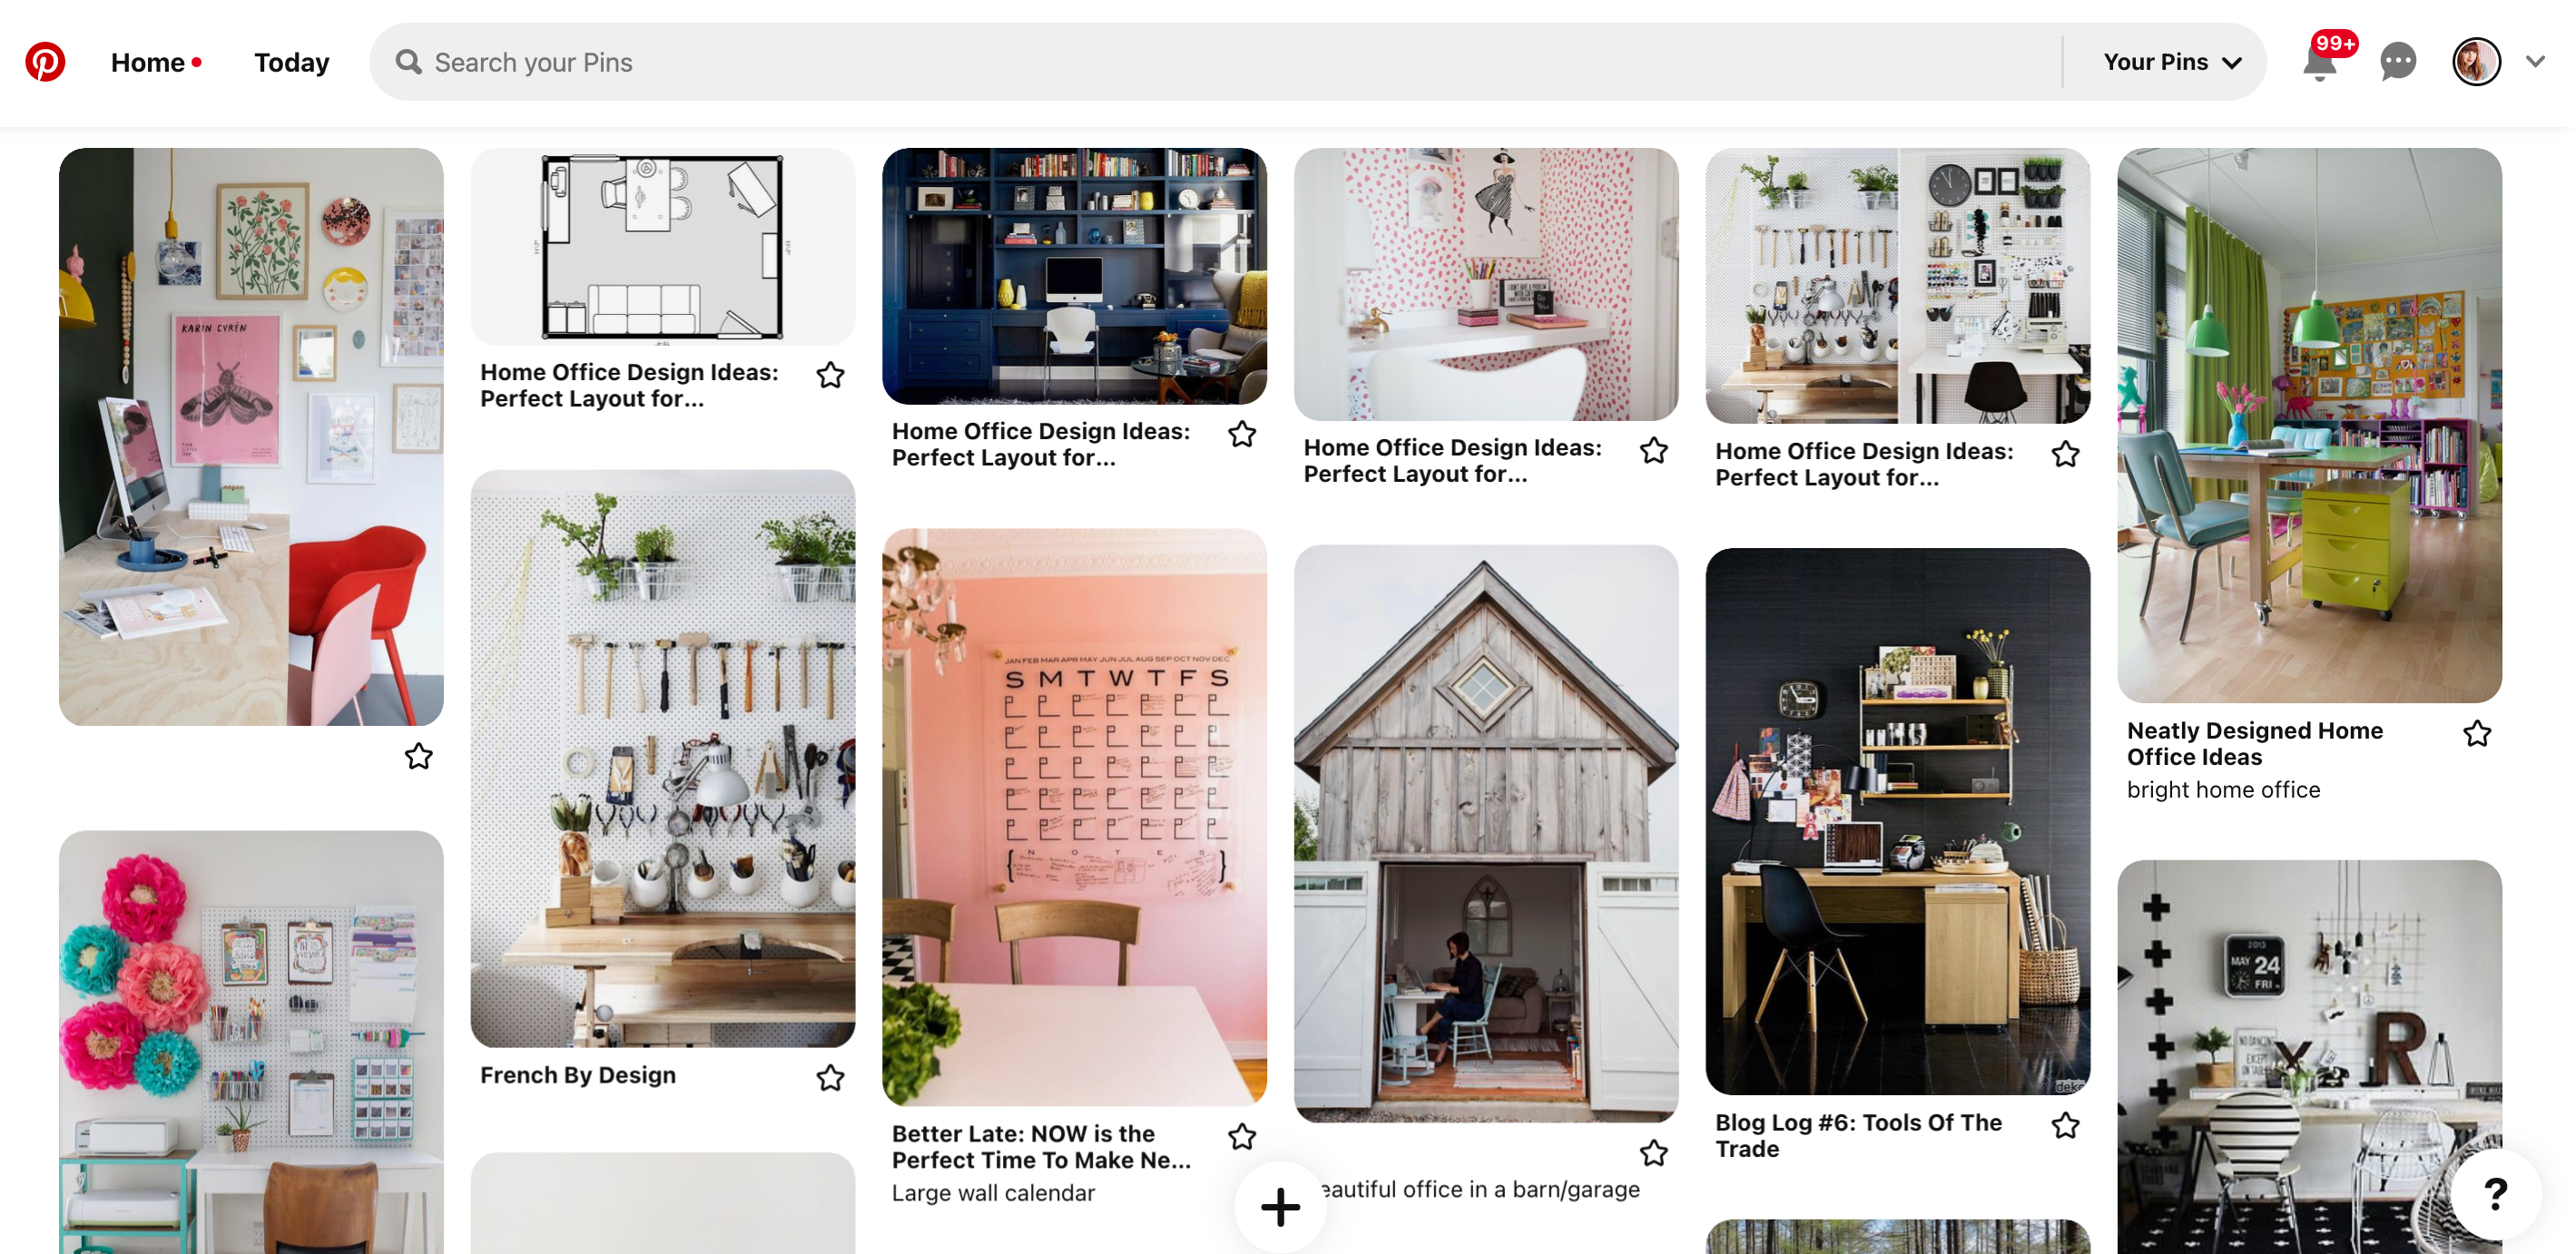 Screengrab of a Pinterest board featuring home office design ideas